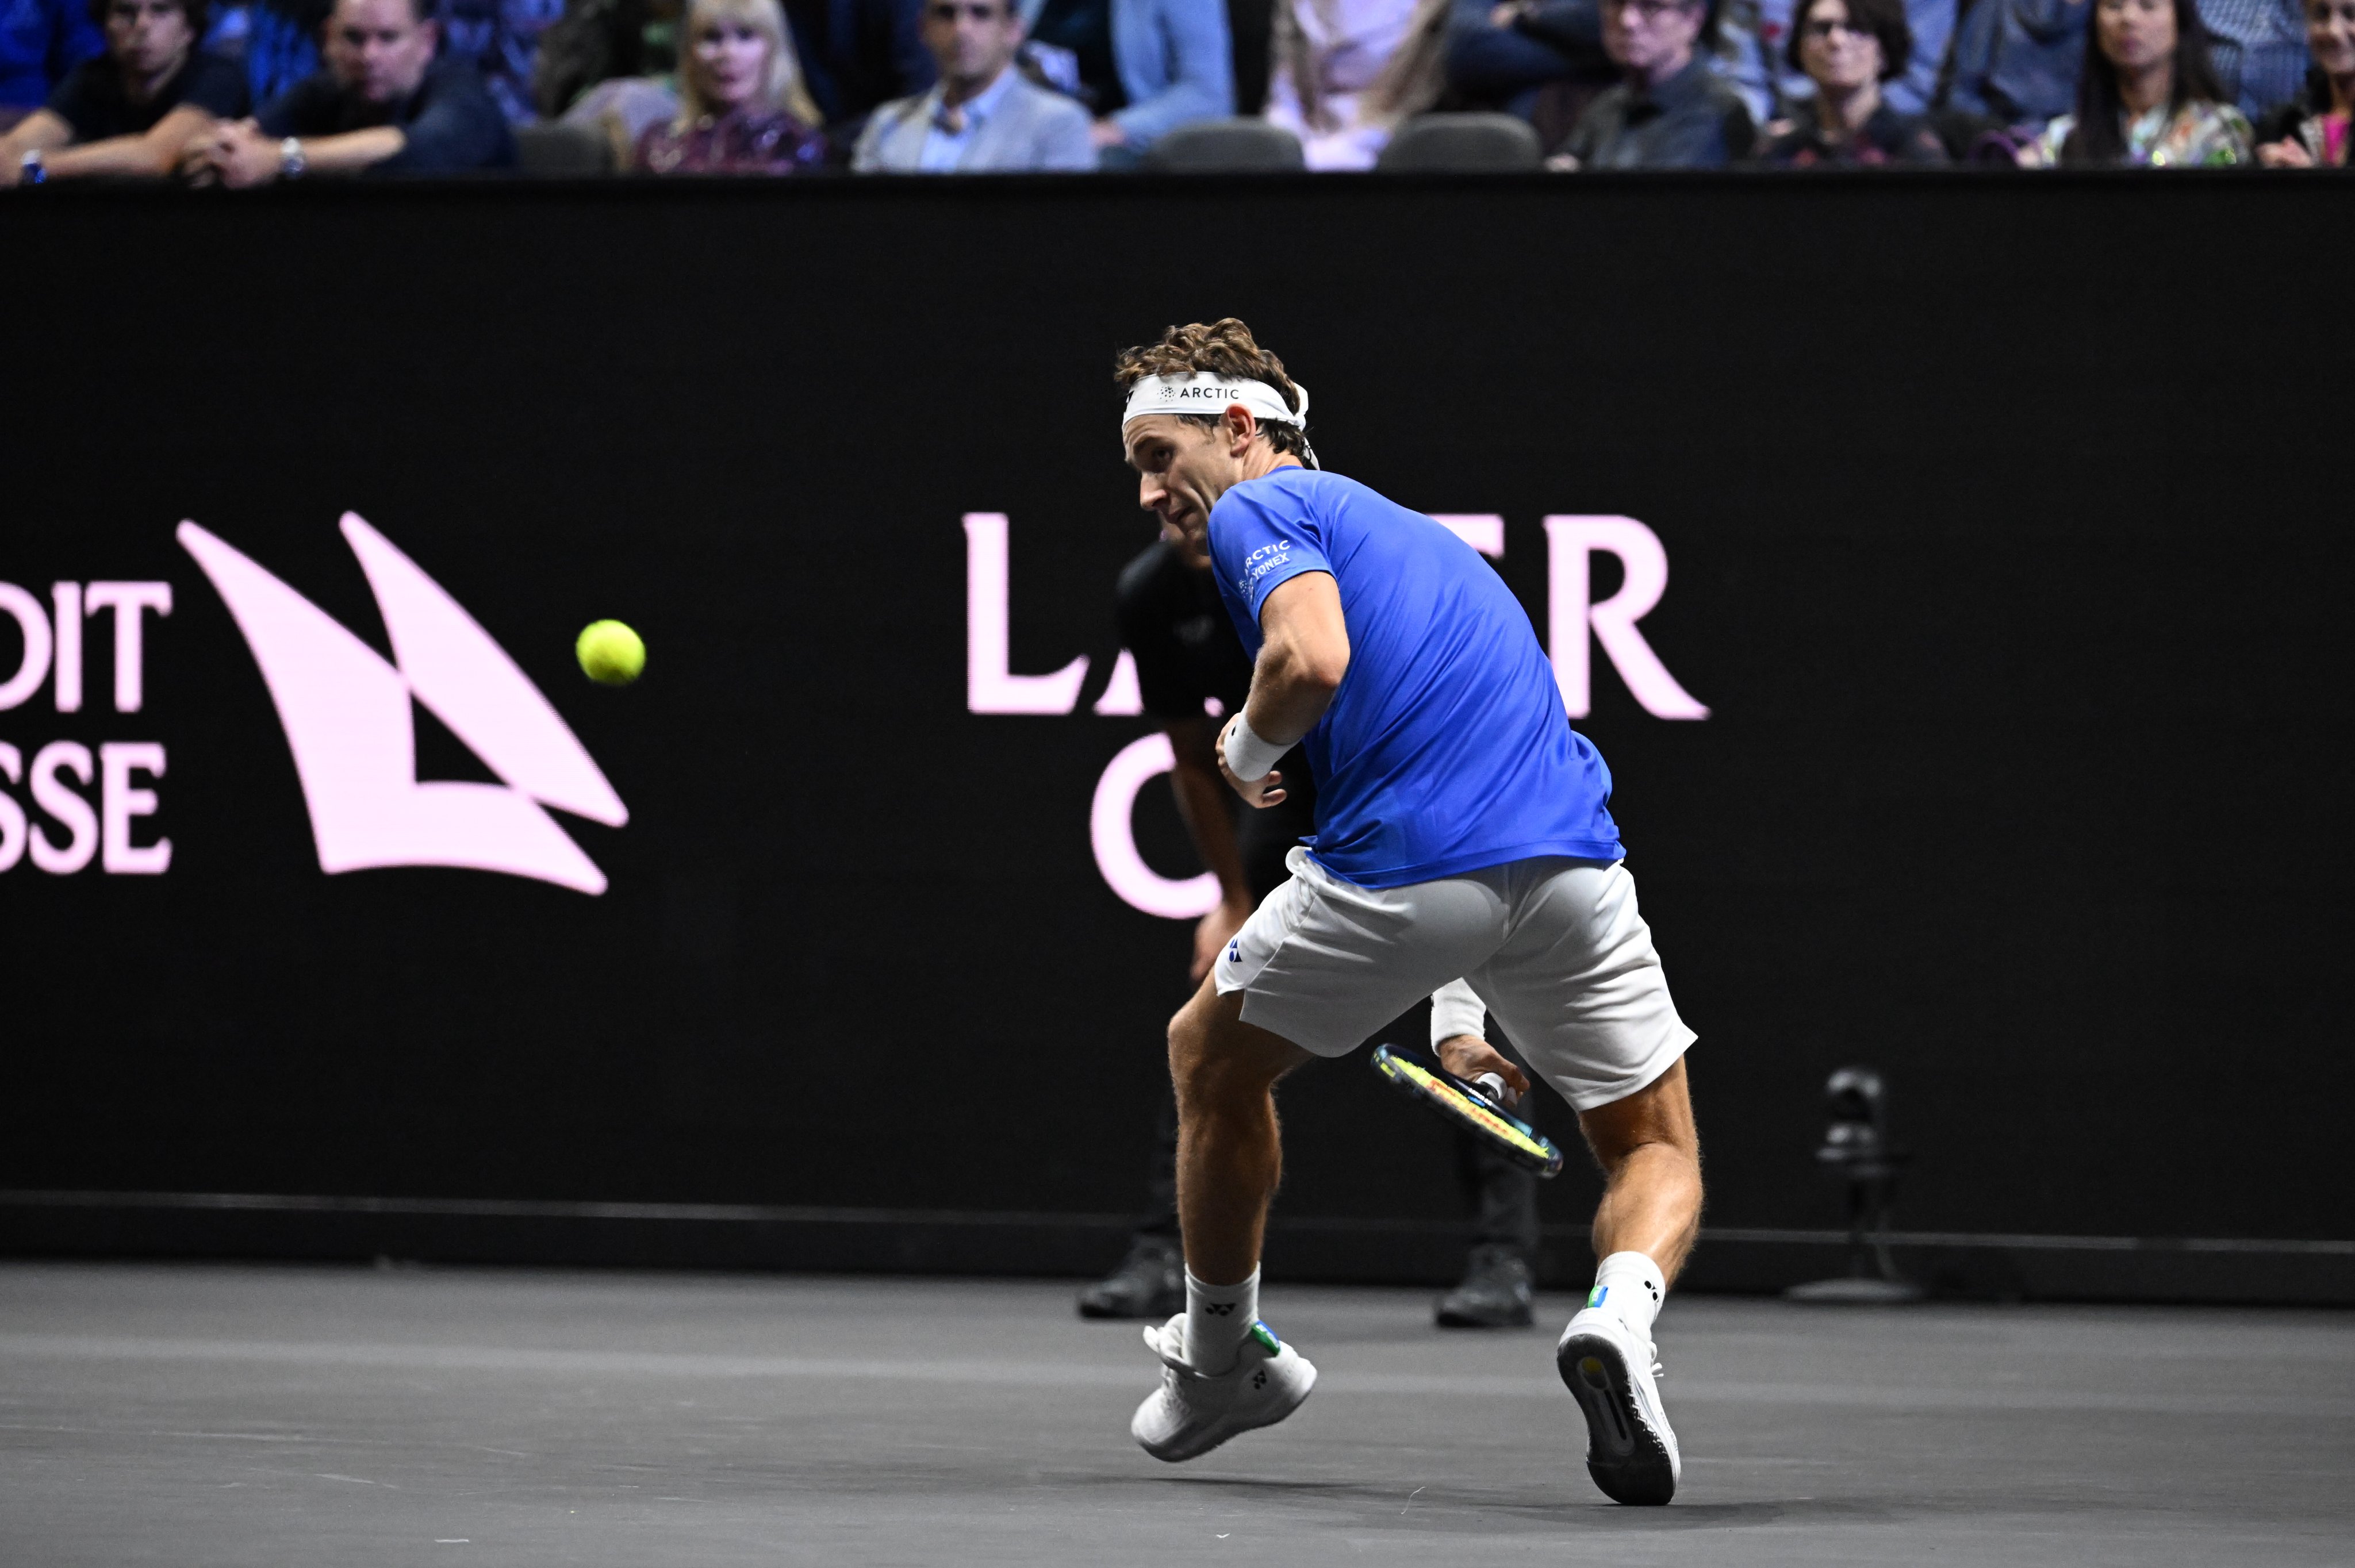 Laver Cup 2022 - Day 1: Roger's Last Match (Sep 23)  FdWTDdbX0AMdLy6?format=jpg&name=4096x4096